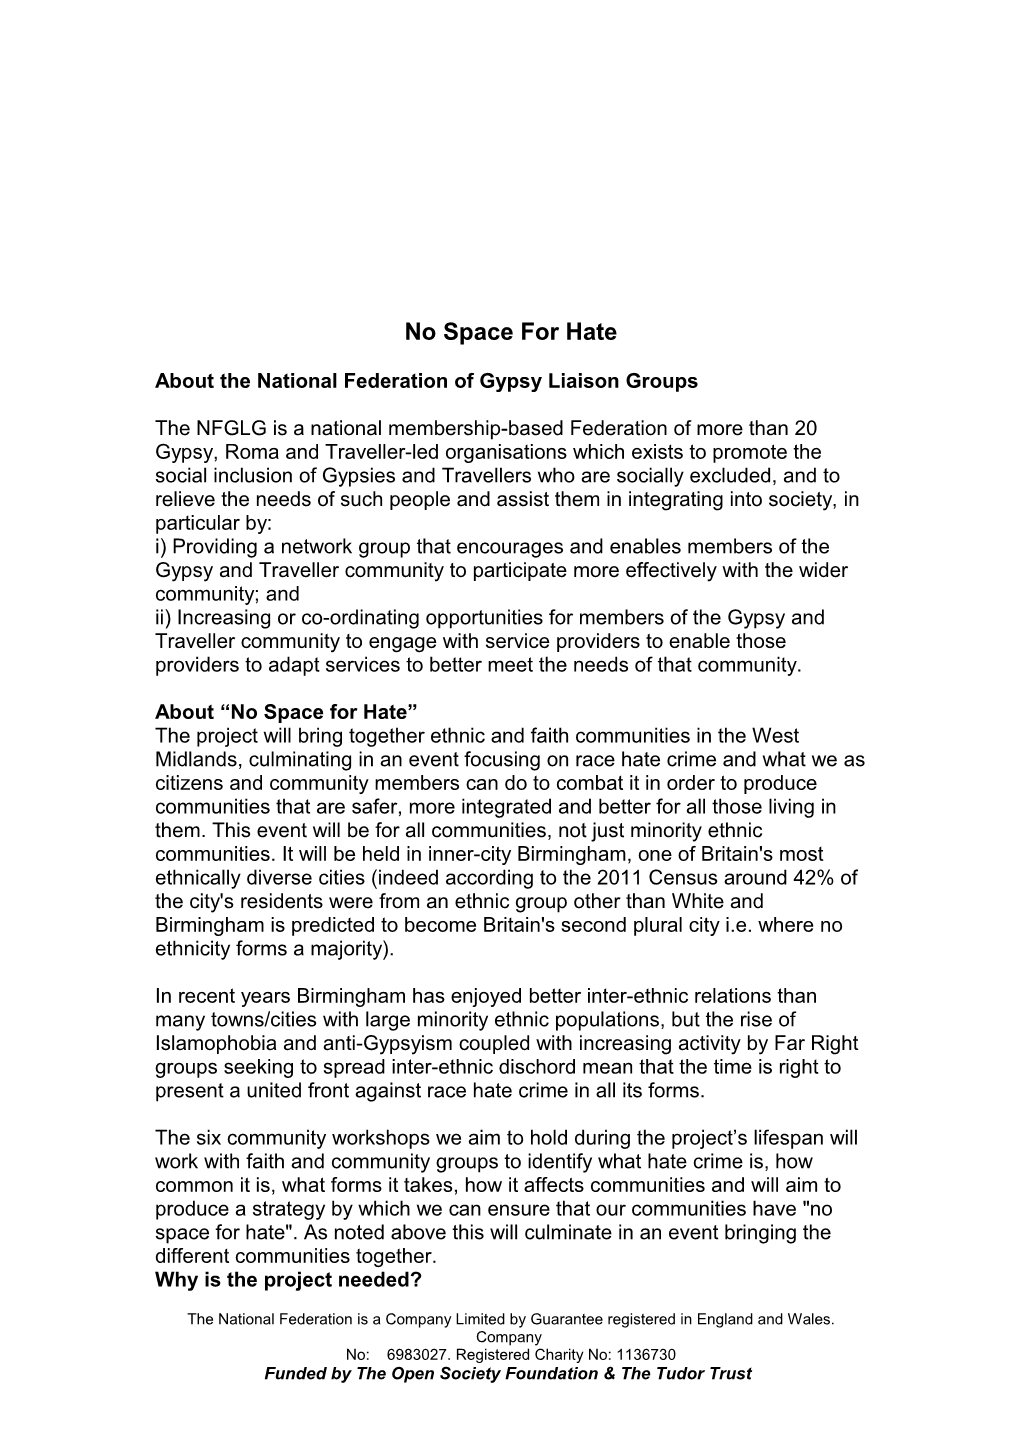 About the National Federation of Gypsy Liaison Groups